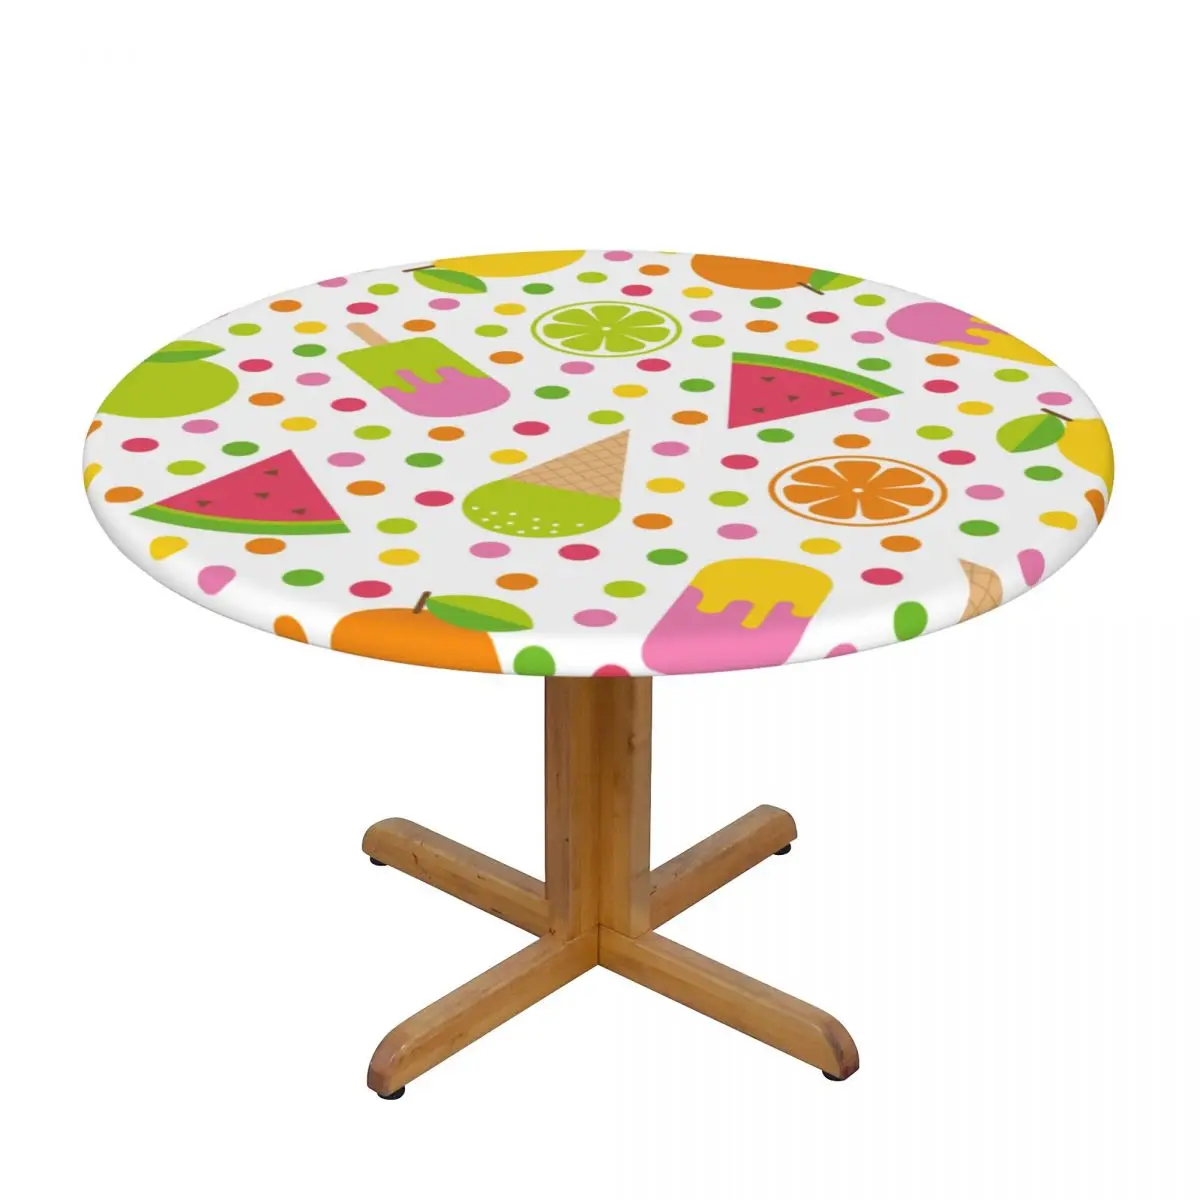 

Round Table Cover Cloth Protector Polyester Tablecloth Colorful Geometric Fruit Dessert With Dots Table Cover with Elastic Edged